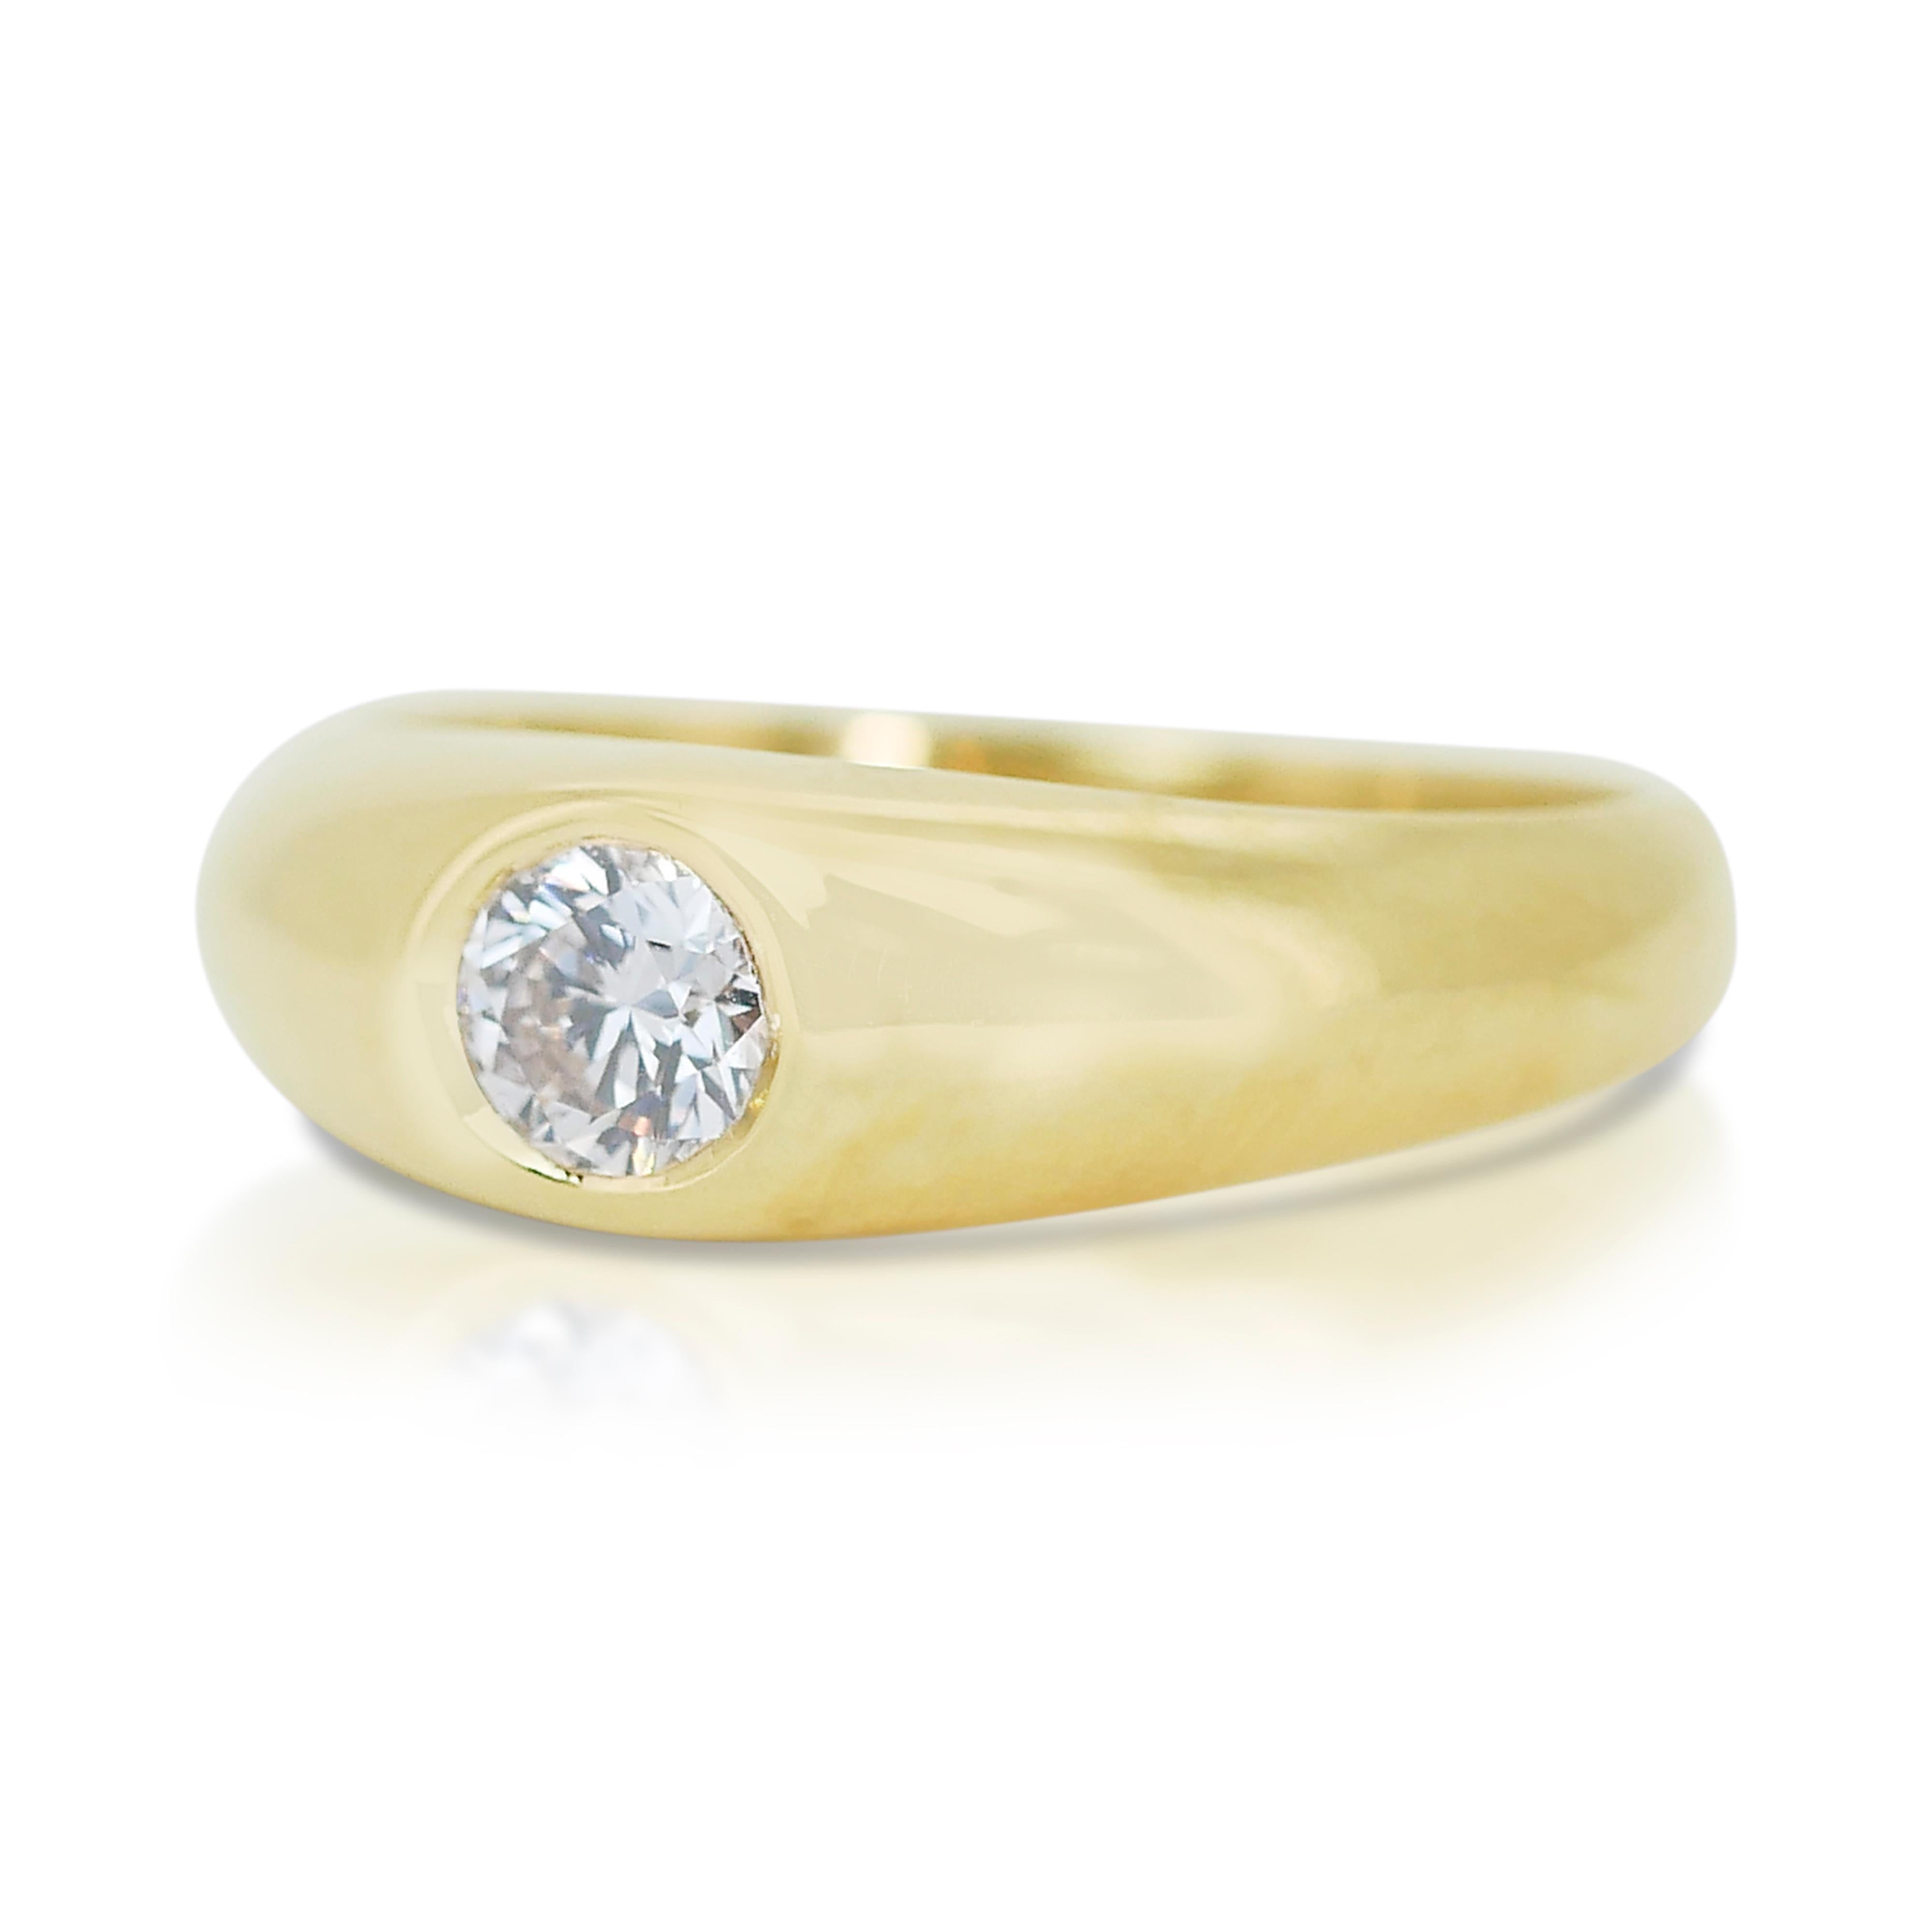 Radiant Harmony: 0.76ct Round Diamond Solitaire Ring in 18k Yellow Gold - GIA Certified

Introducing the 